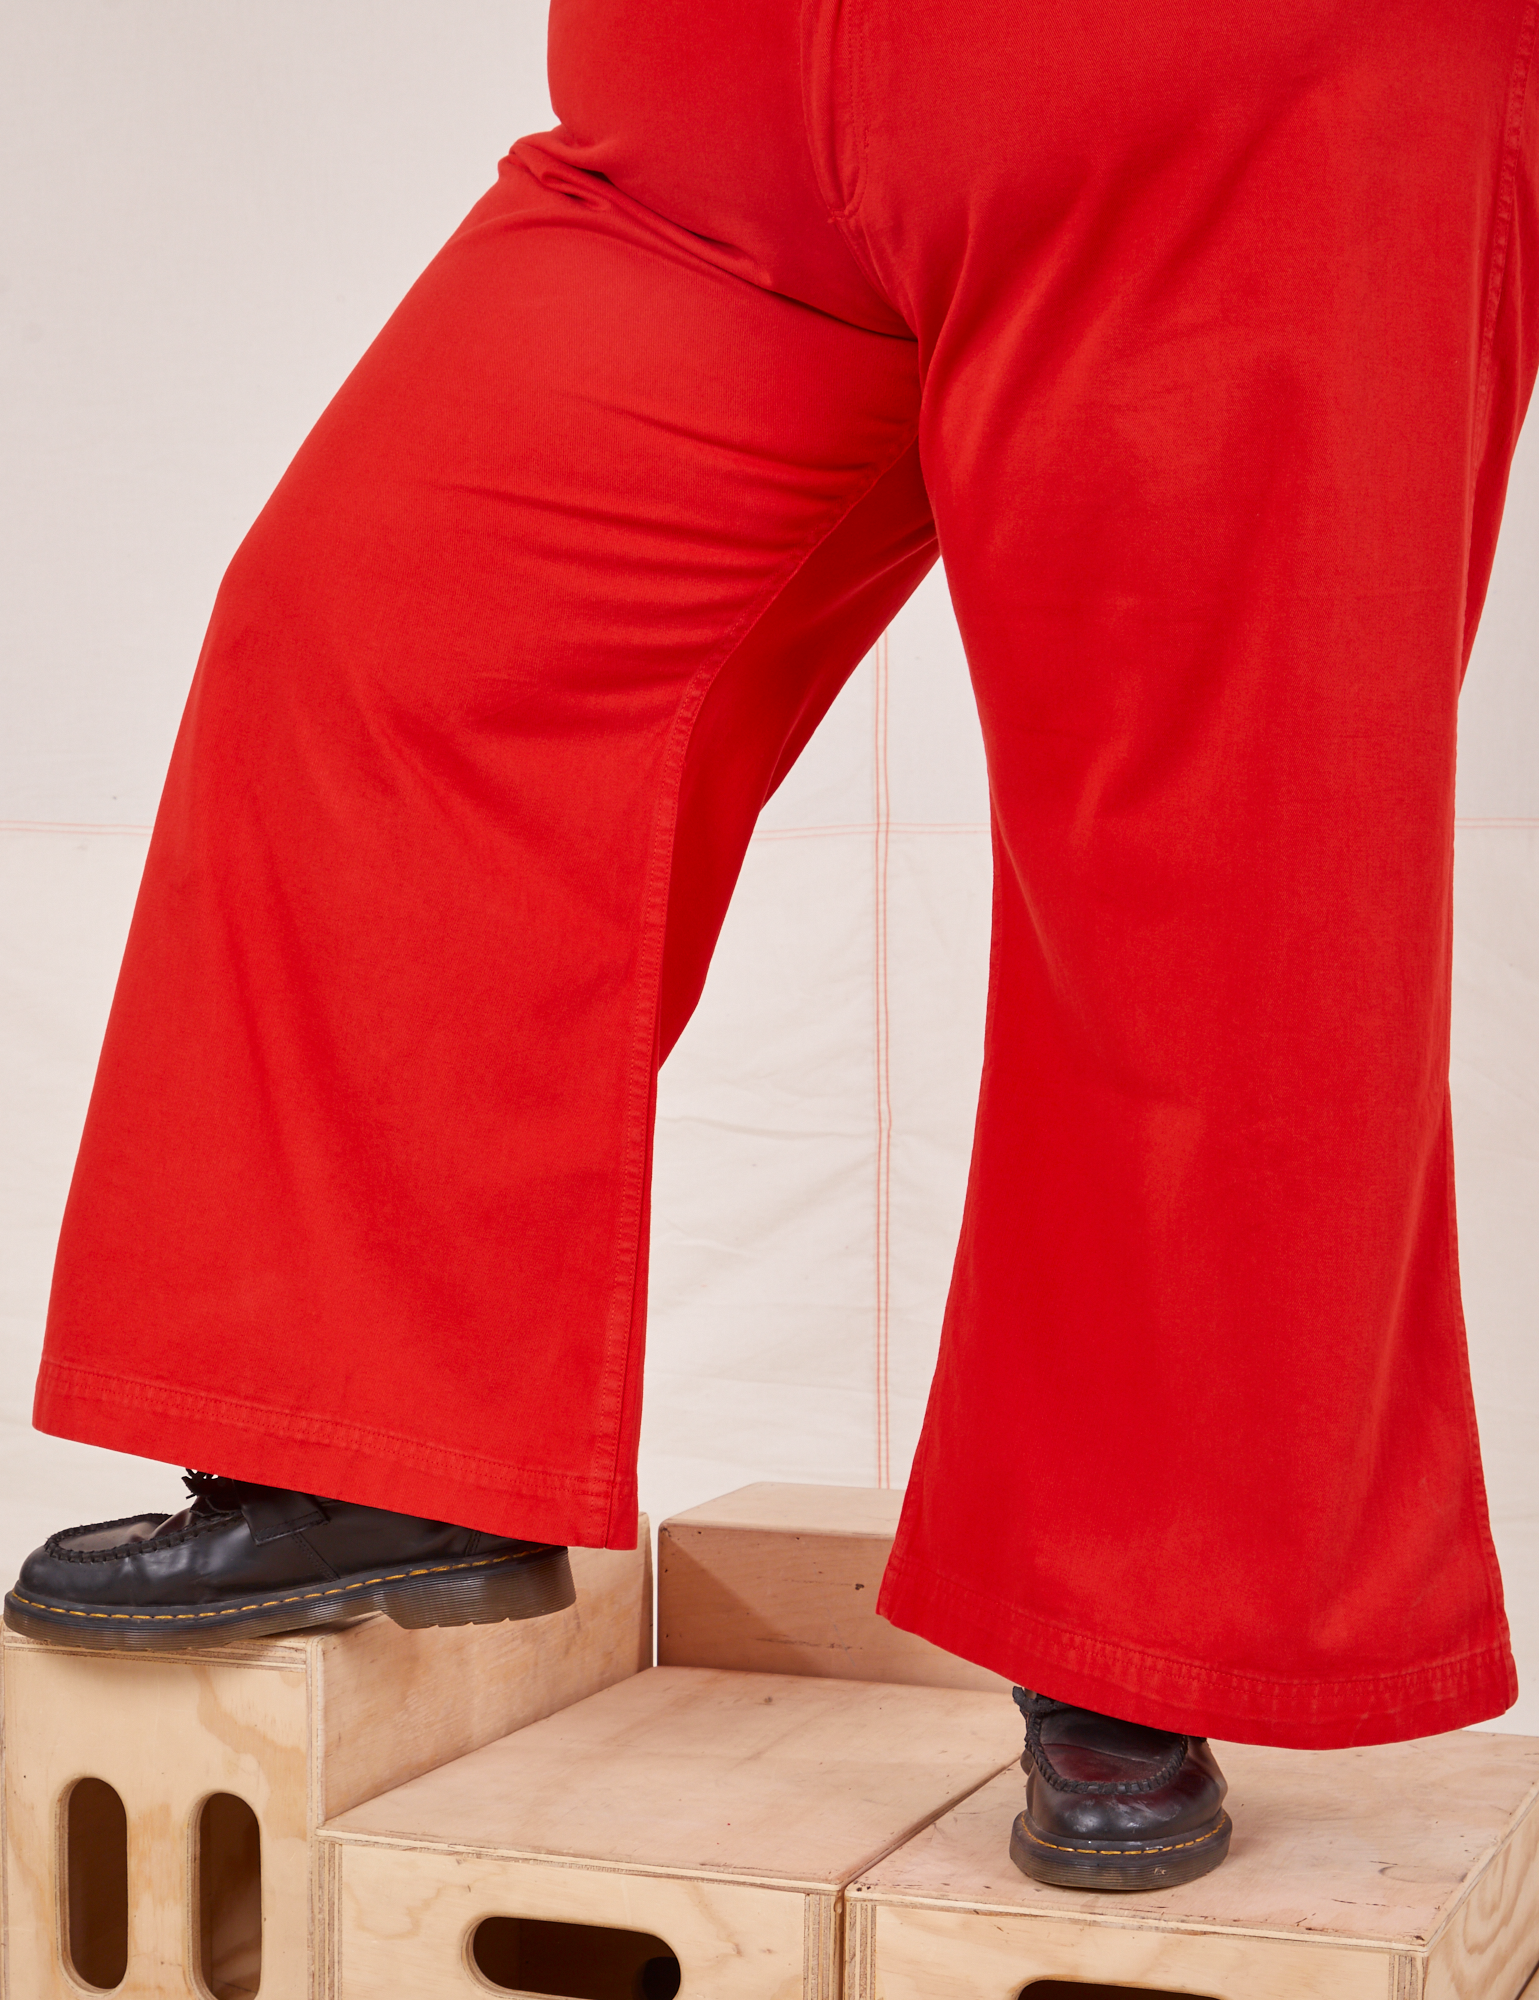 Bell Bottoms in Mustang Red pant leg close up on Sam